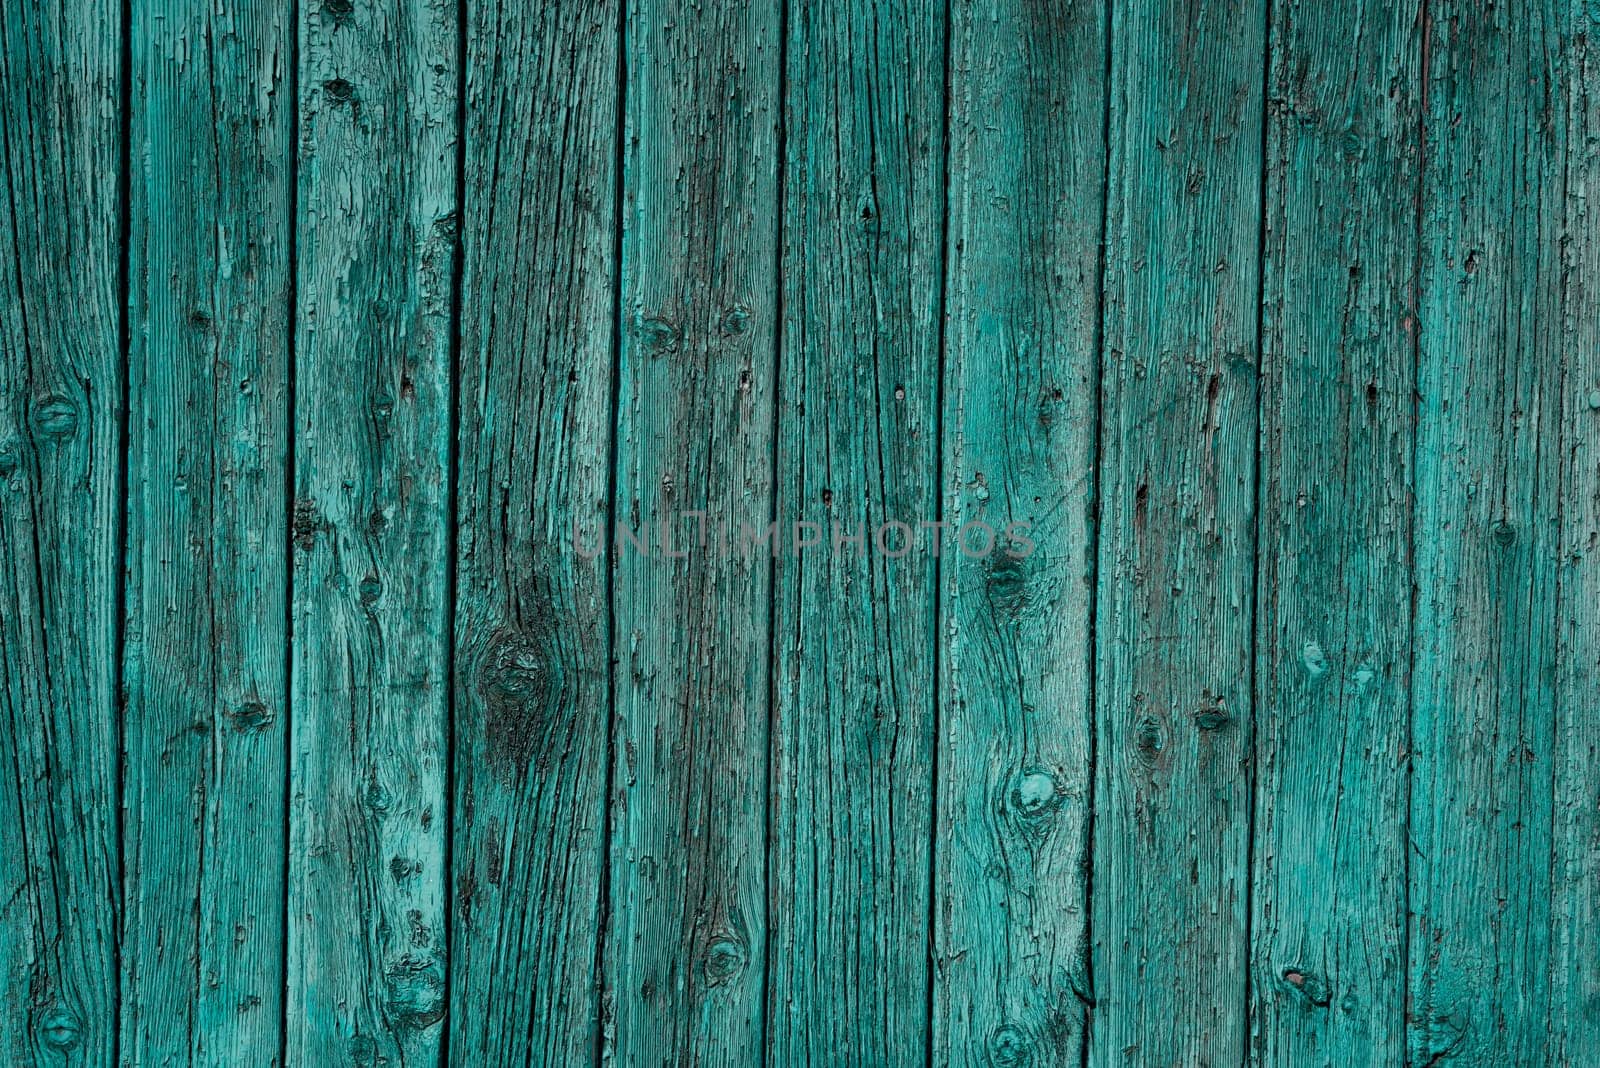 Old wooden blue planks fence textured Background with aged surface details. Weathered vintage rustic timber closeup